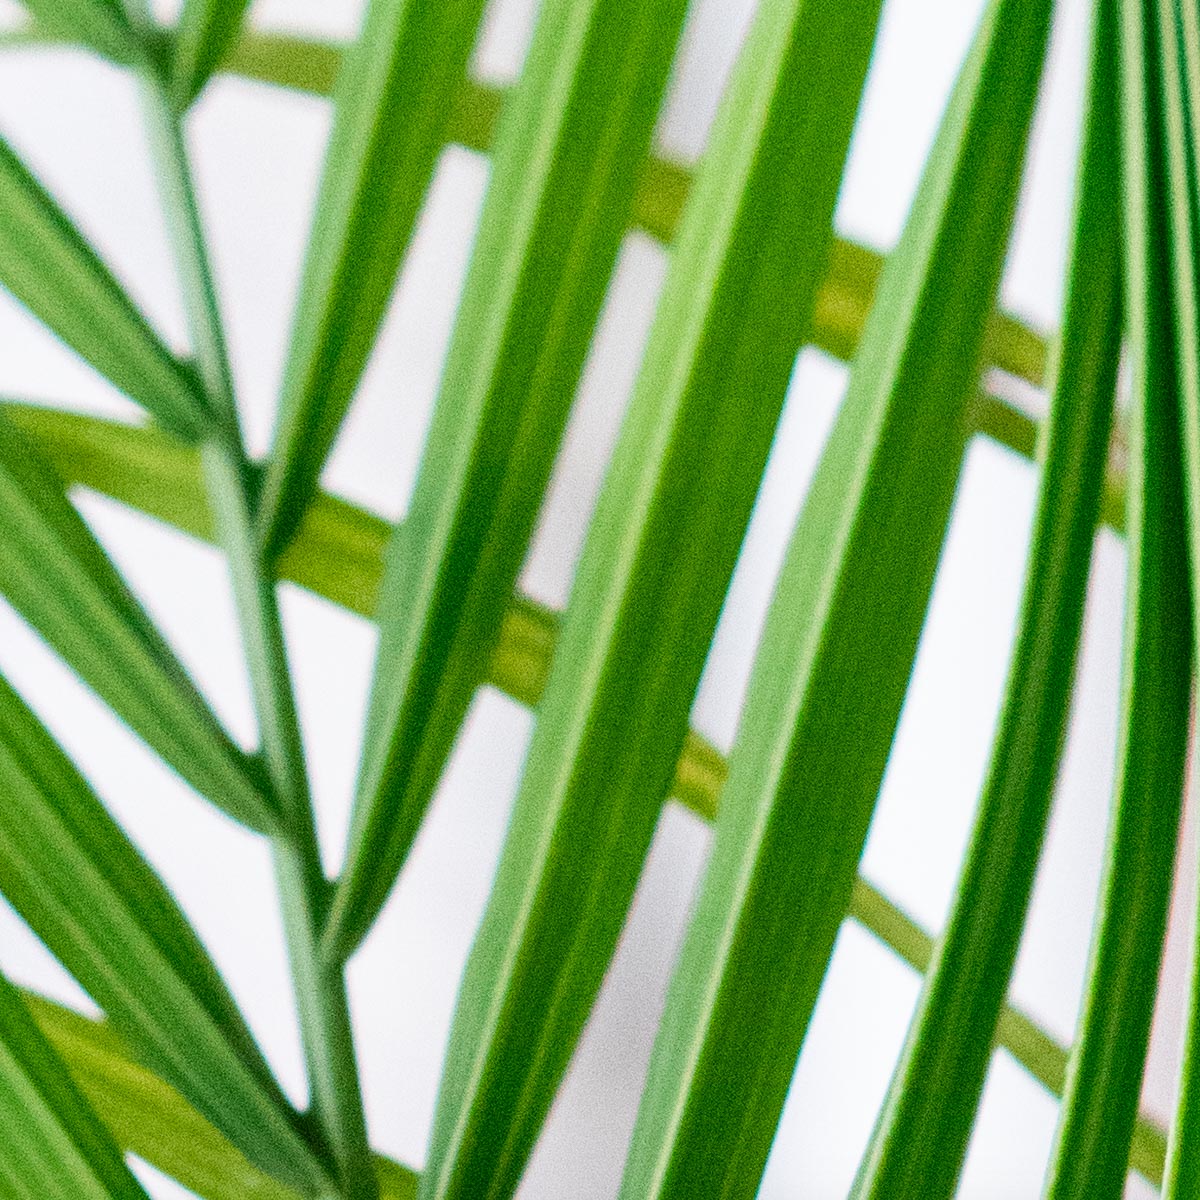 Detail image of a palm plant to show how grain in ISO shows up on photographic images.